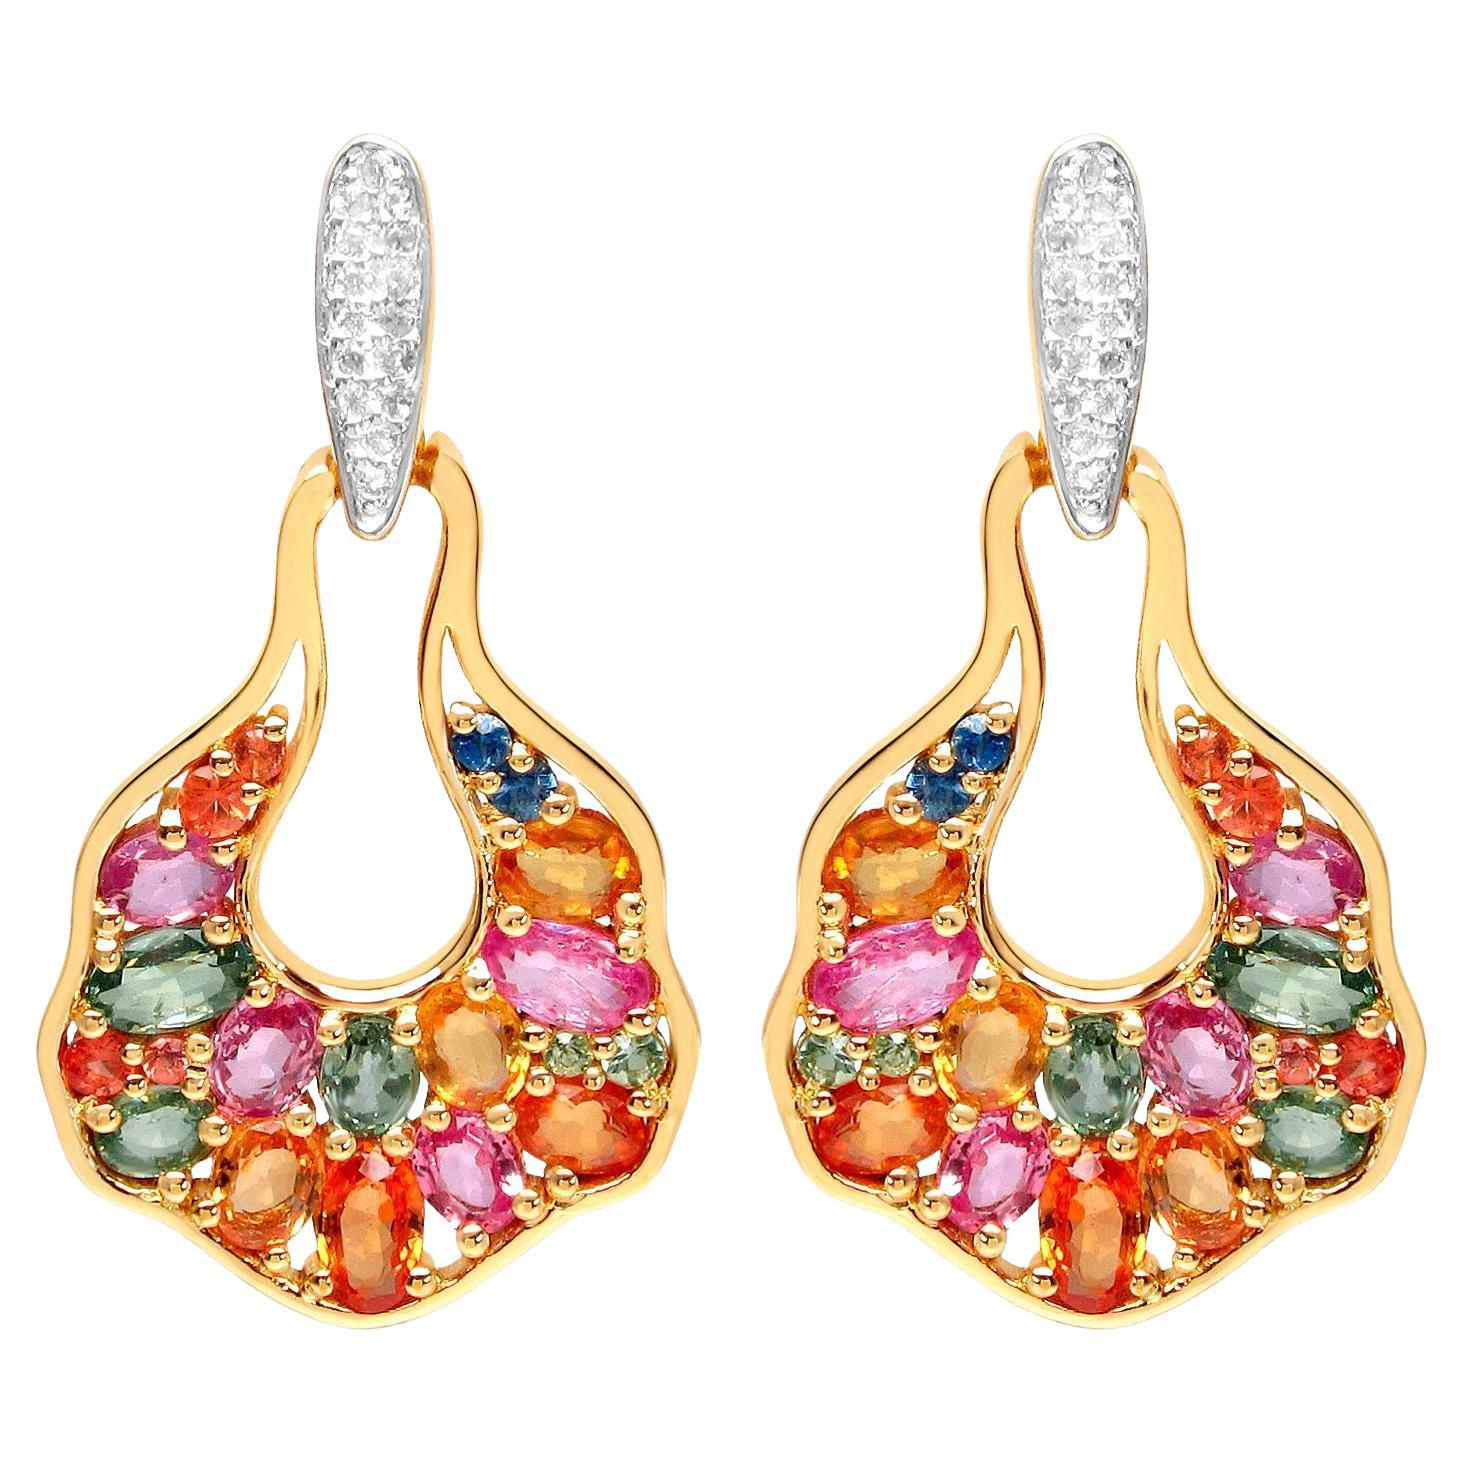 Multicolored Sapphires Dangle Earrings White Zircon 5.7 Carats 14K Gold Plated